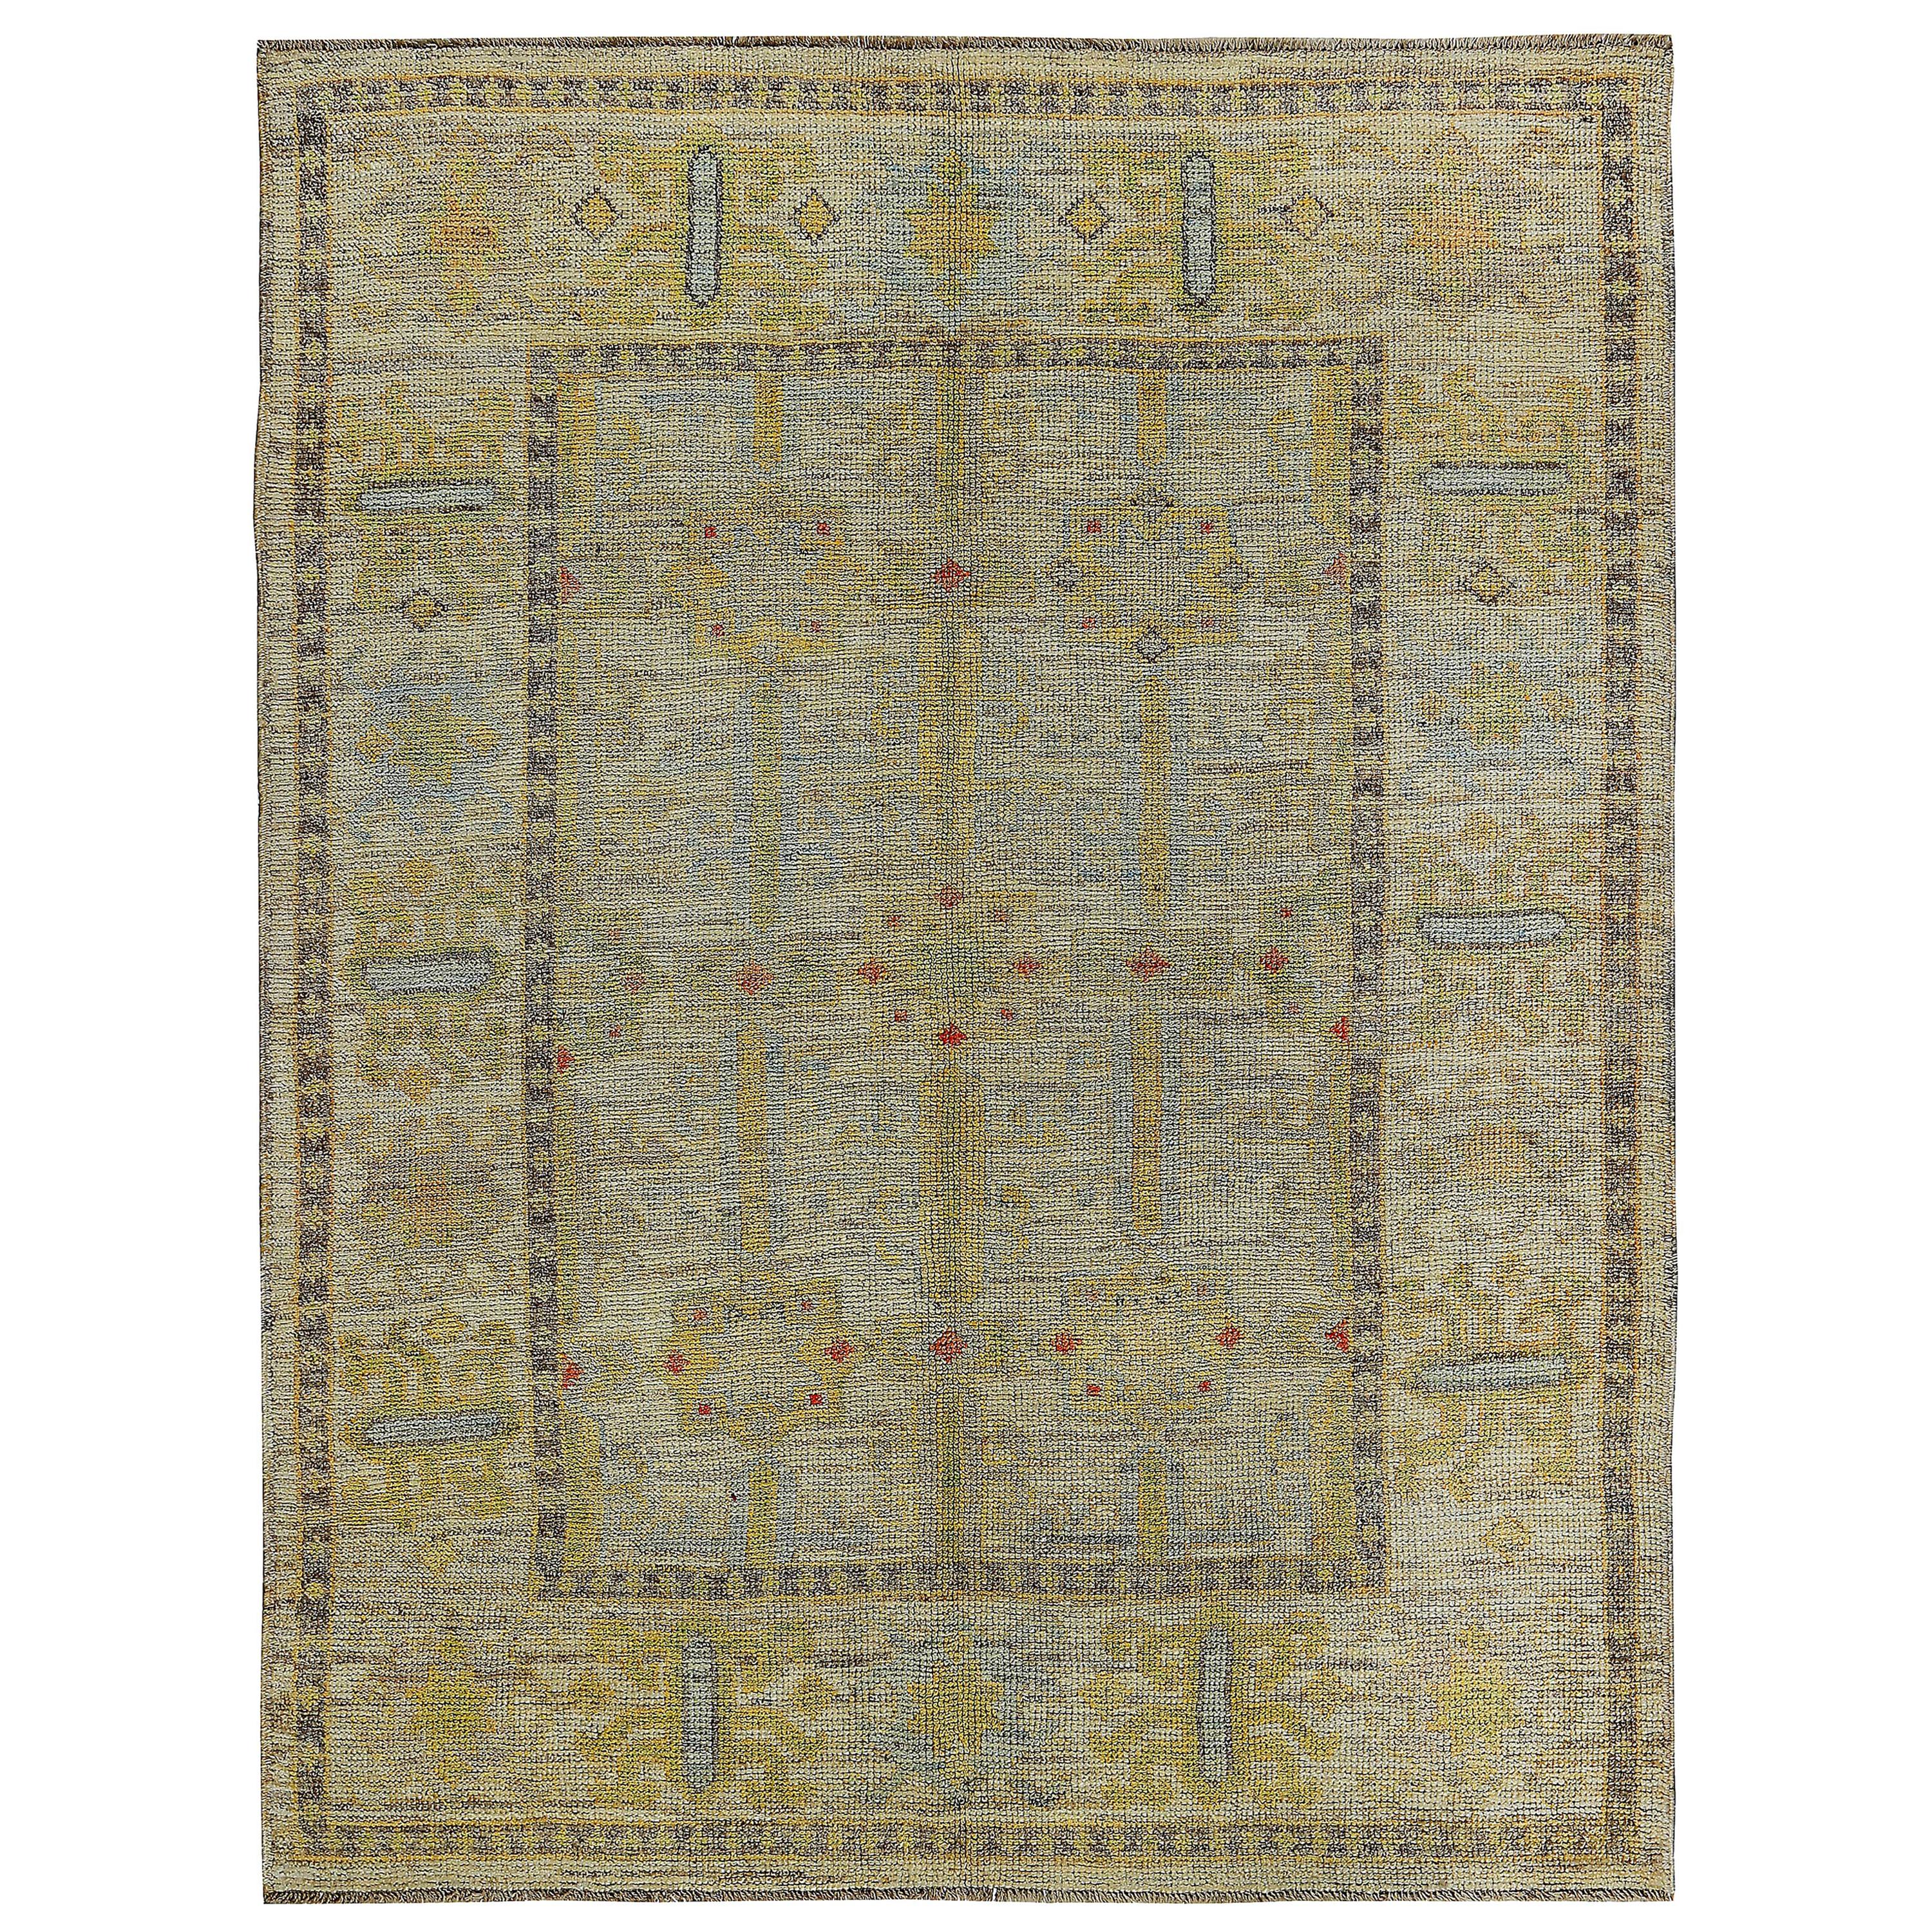 Turkish Oushak Rug with Gold and Gray Floral Medallions on Ivory Field